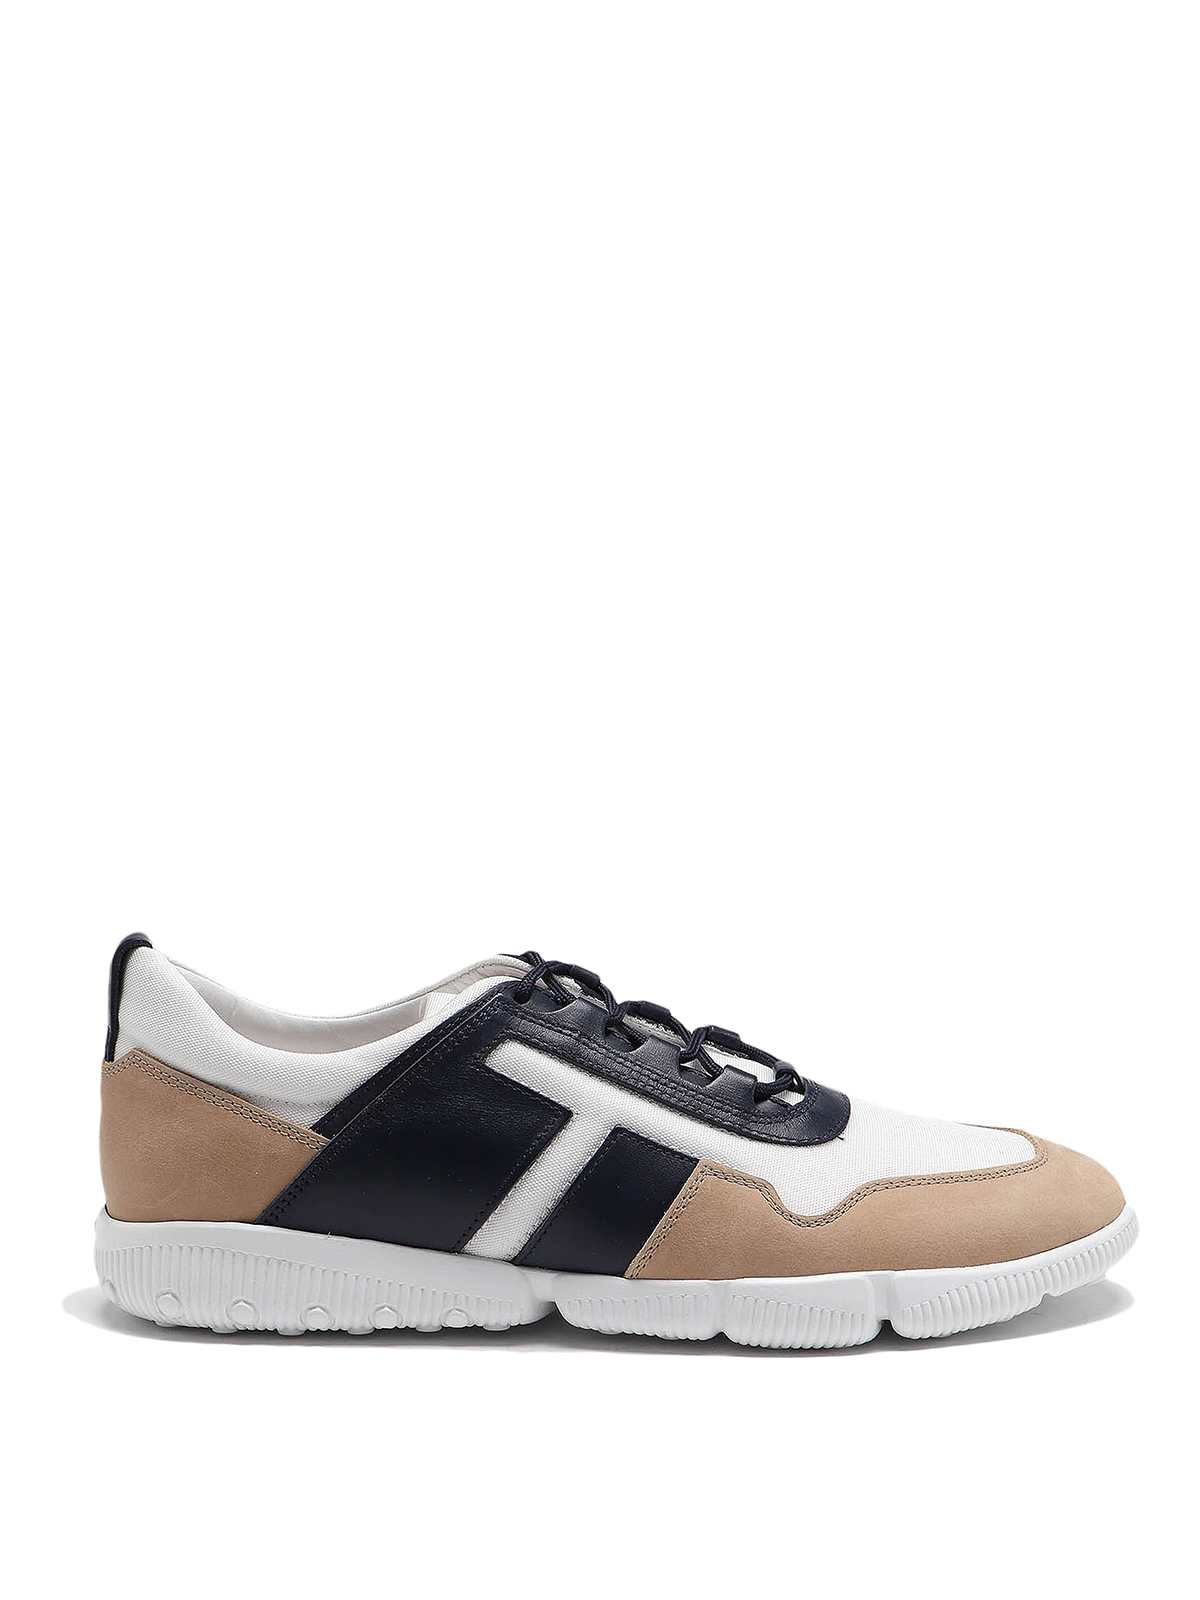 Trainers Tod'S - Tech fabric and leather lightweight sneakers 